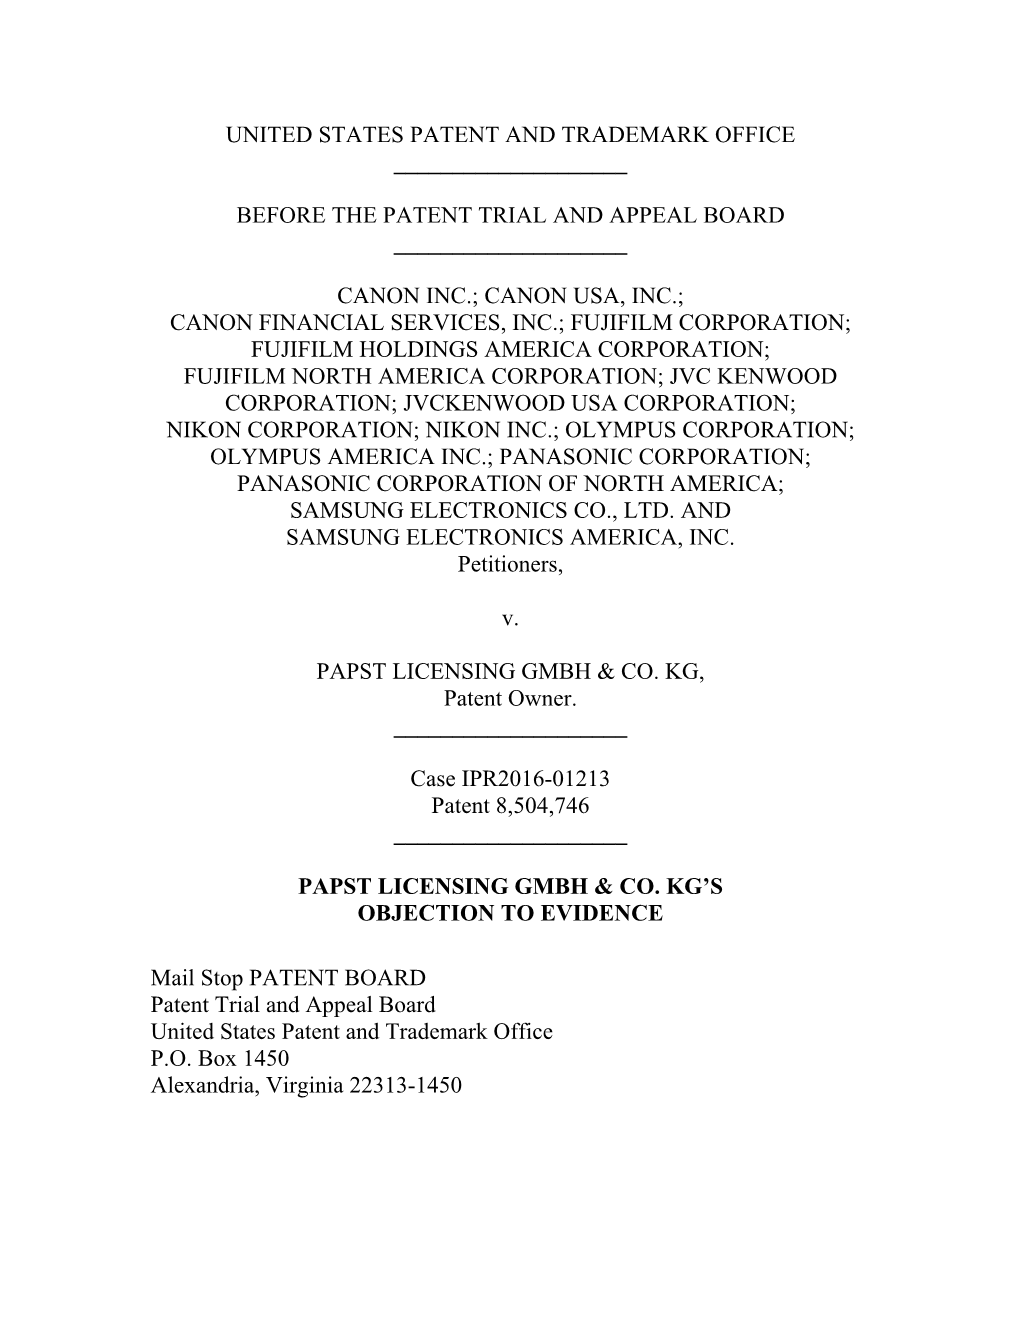 Before the Patent Trial and Appeal Board ______